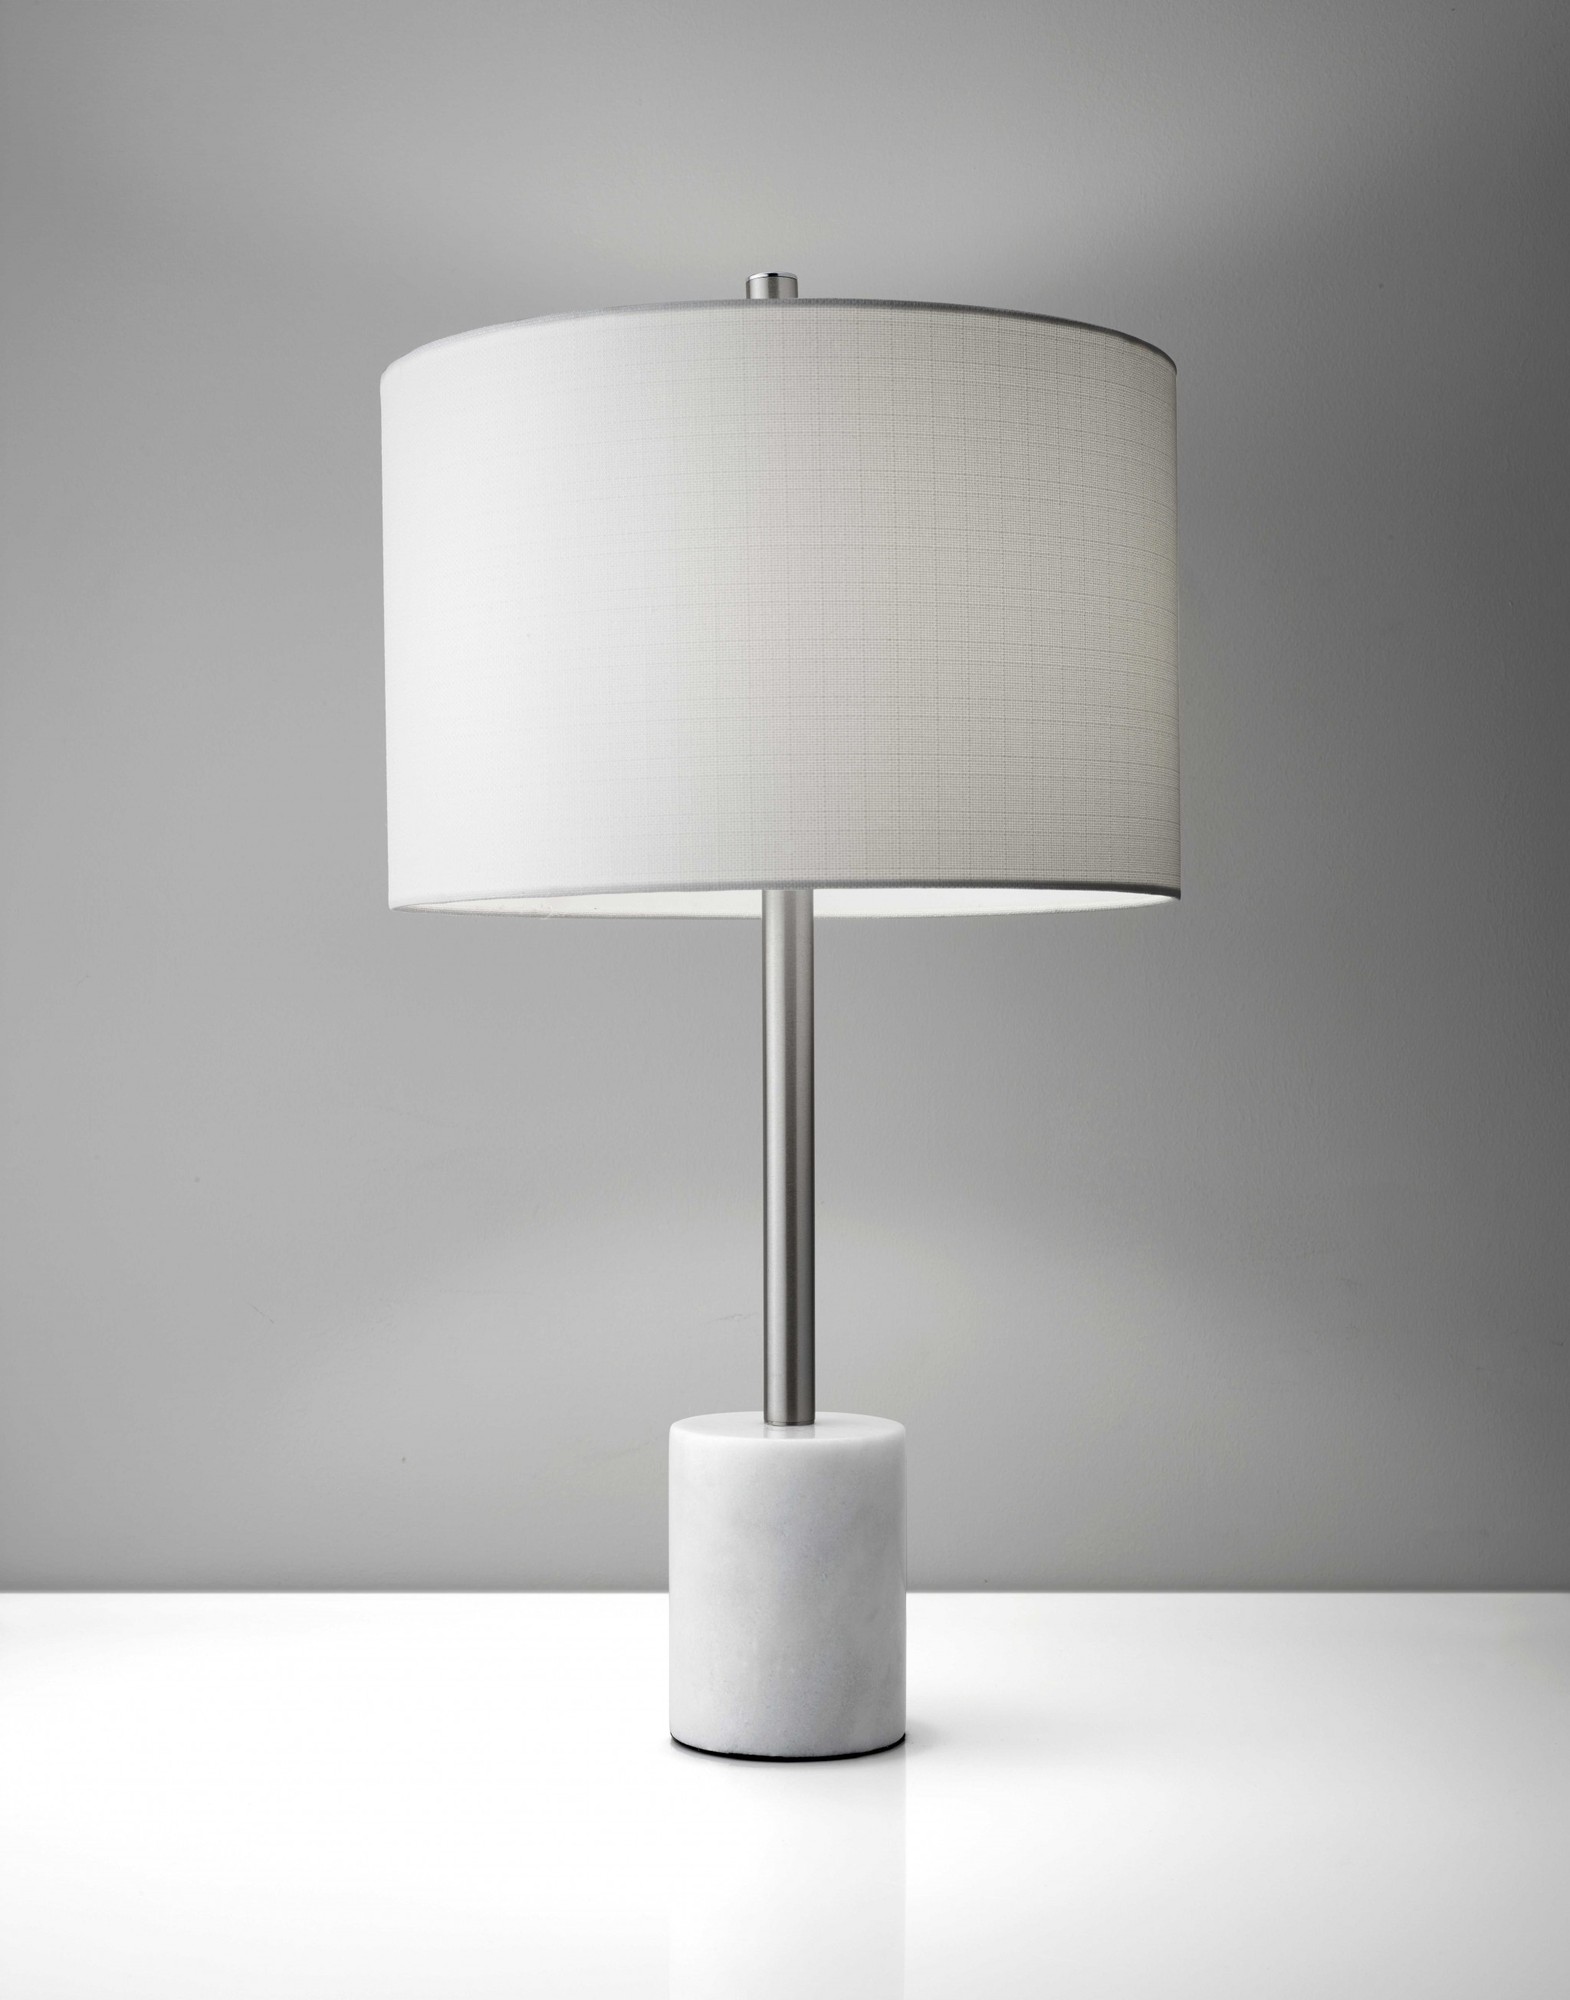 15" X 15" X 28" Brushed Steel Marble Table Lamp